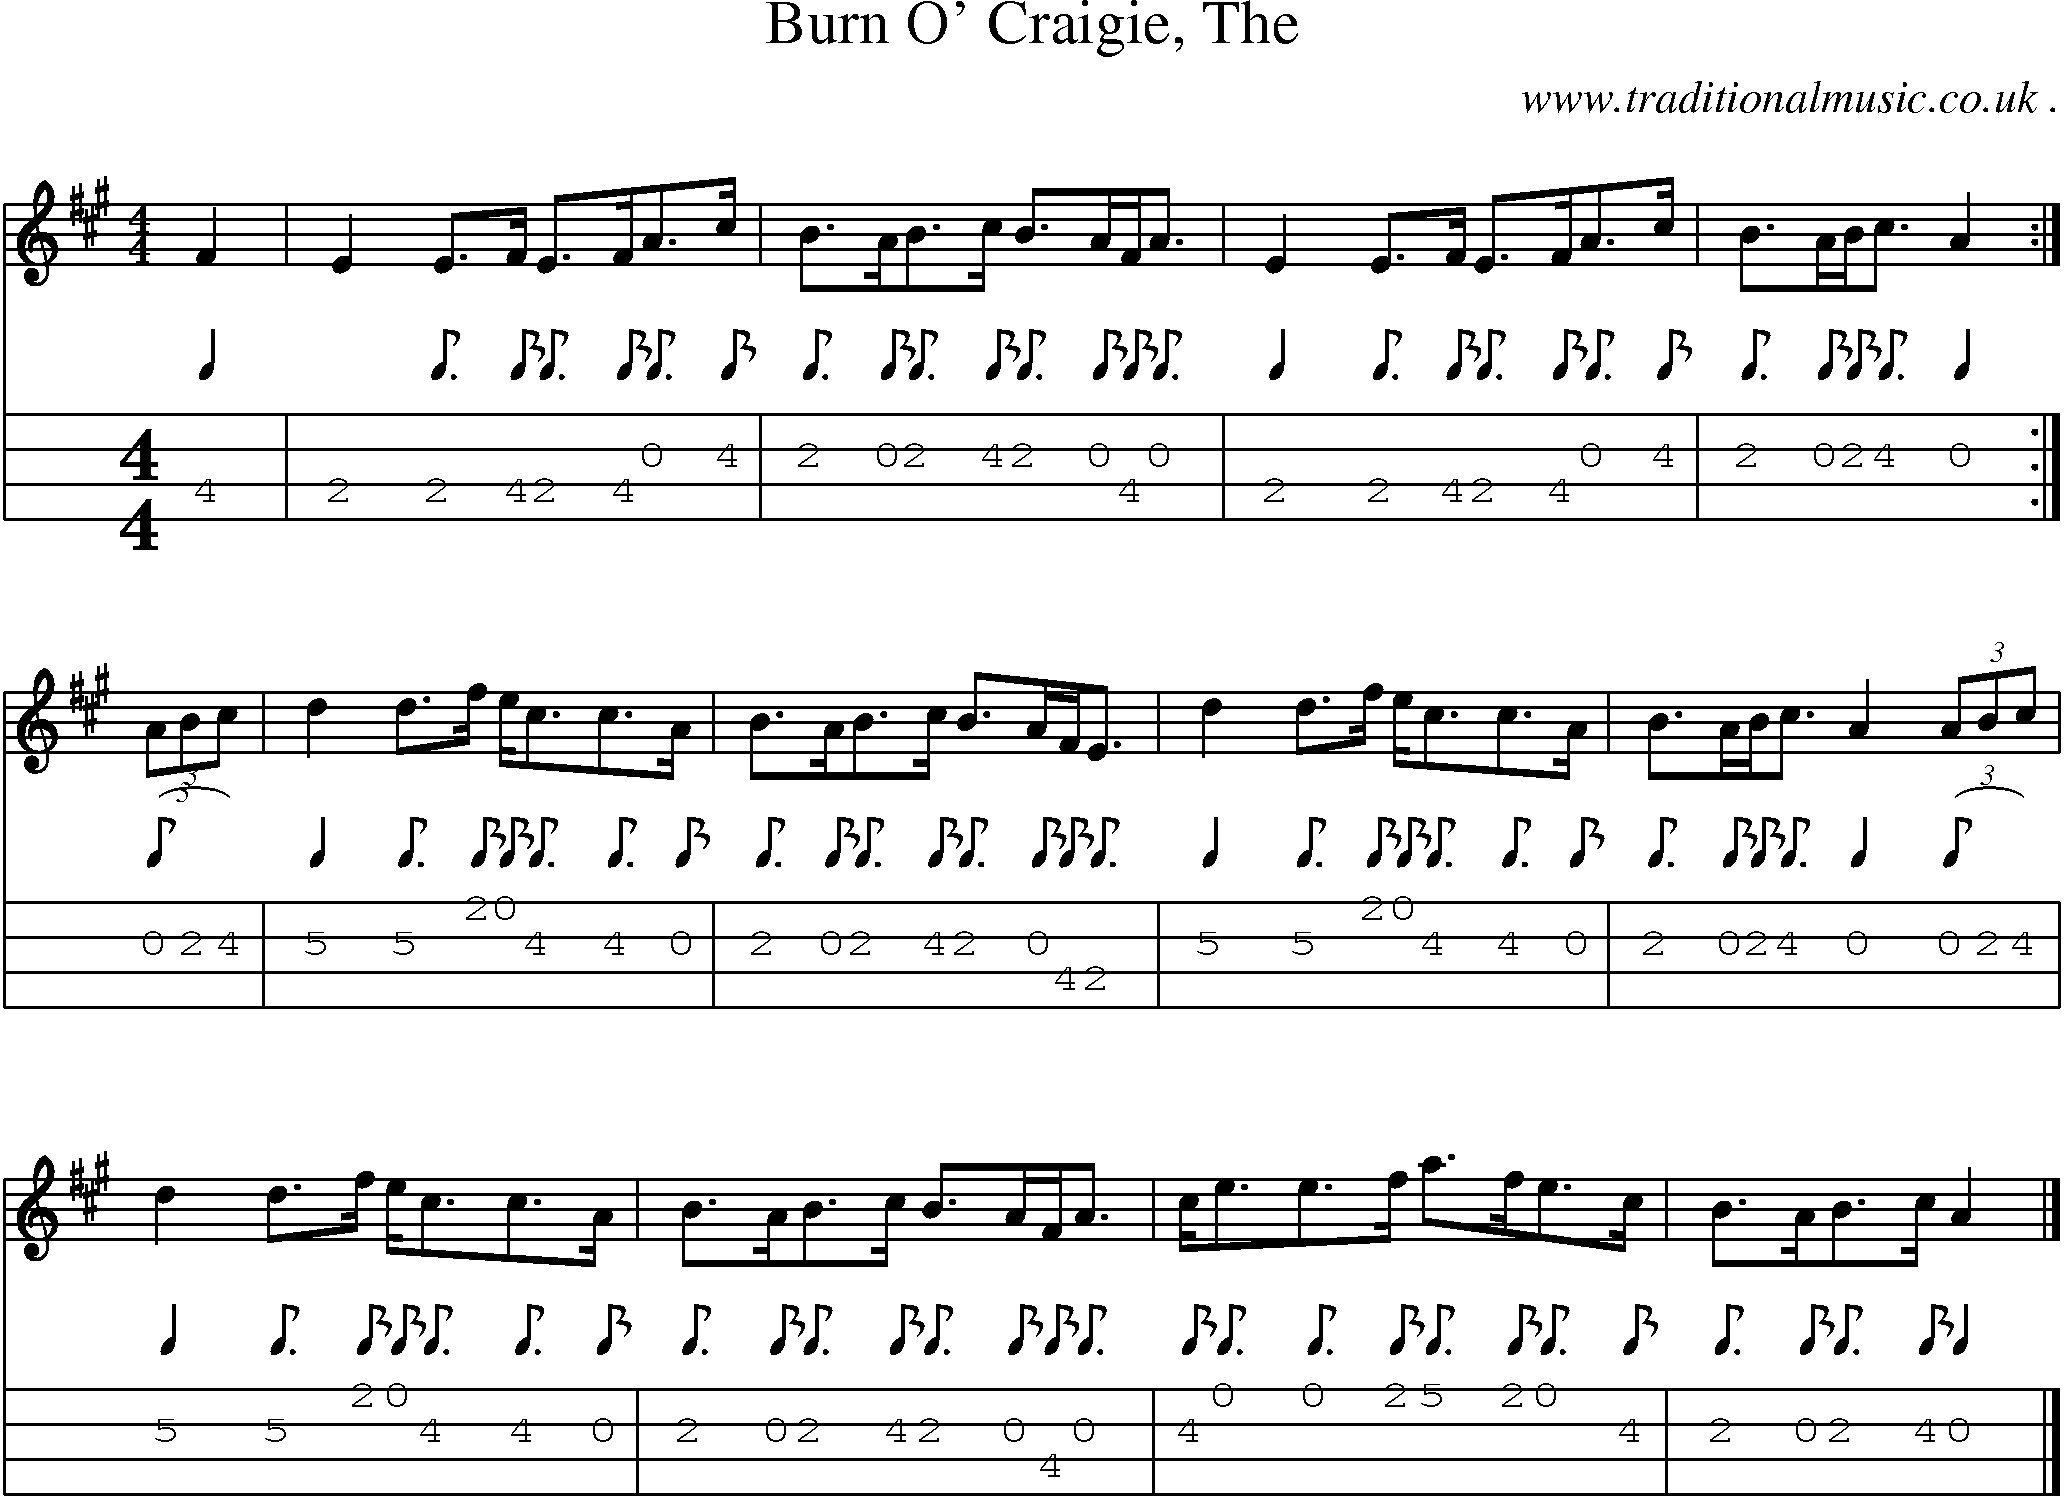 Sheet-music  score, Chords and Mandolin Tabs for Burn O Craigie The